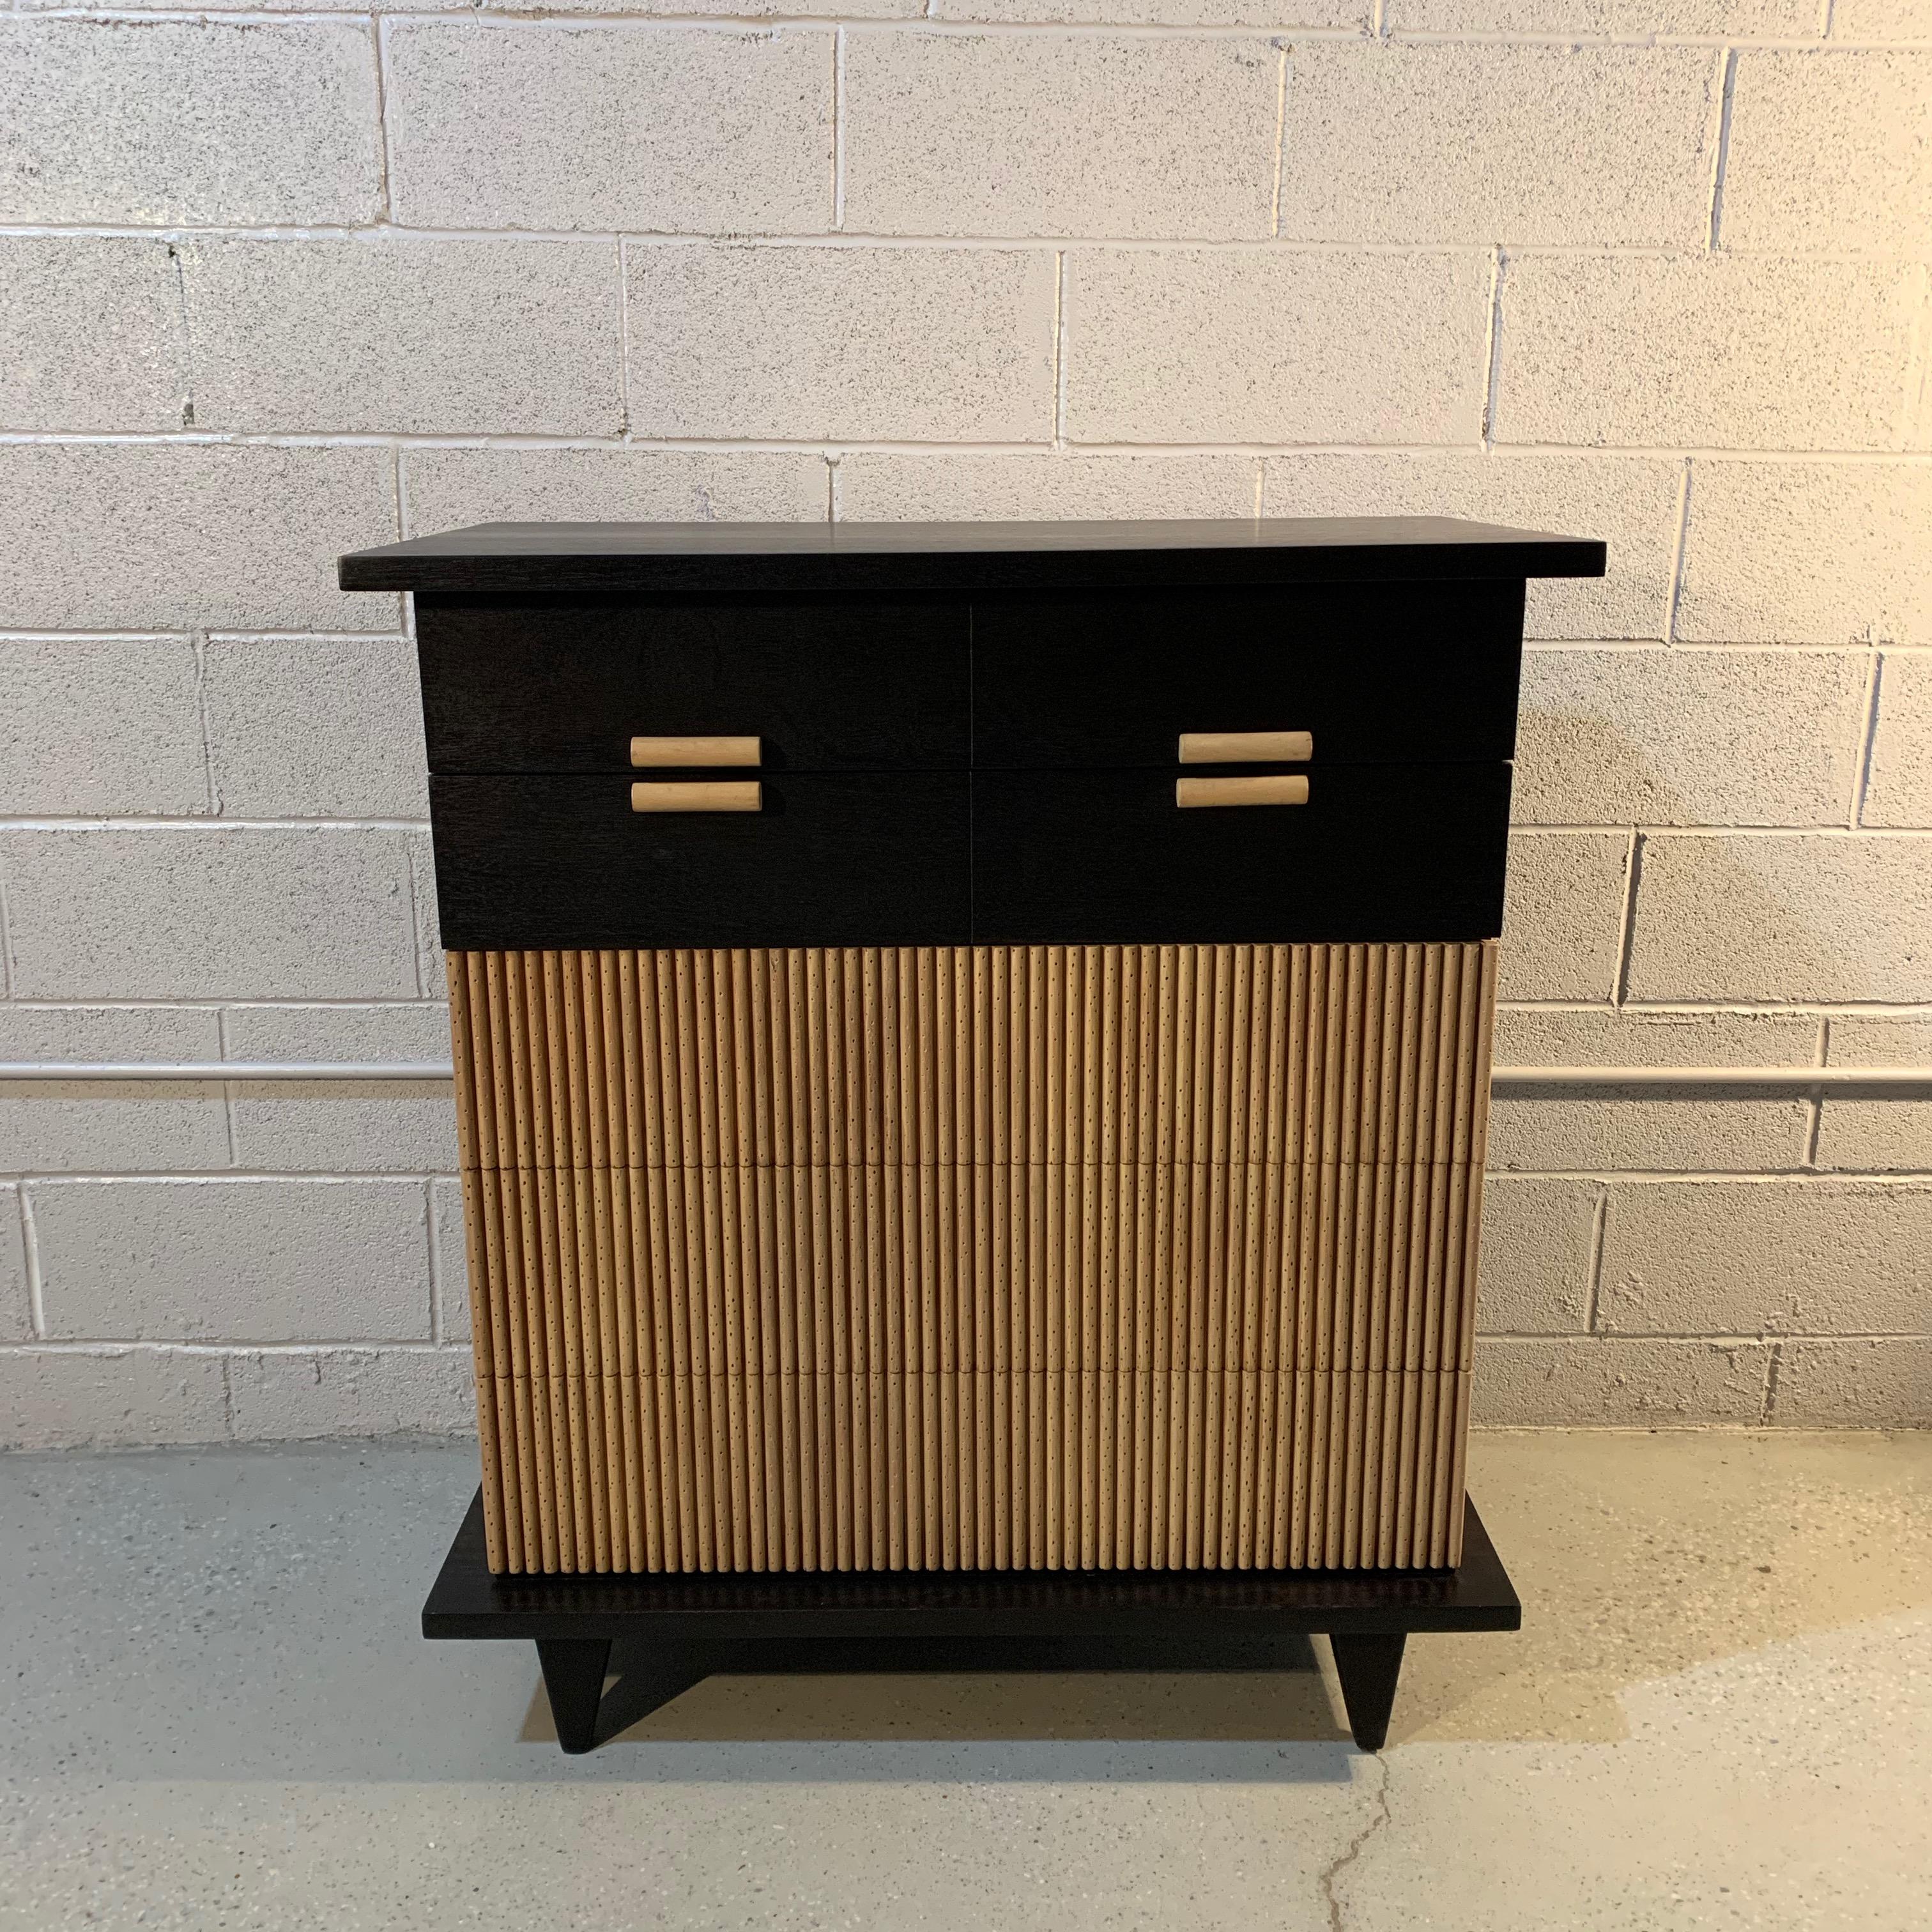 Mid-Century Modern, mahogany, highboy dresser by American of Martinsville features a faux bamboo motif on 3 of it's 5 drawers with contrasting black lacquer accents within a recessed frame detail.